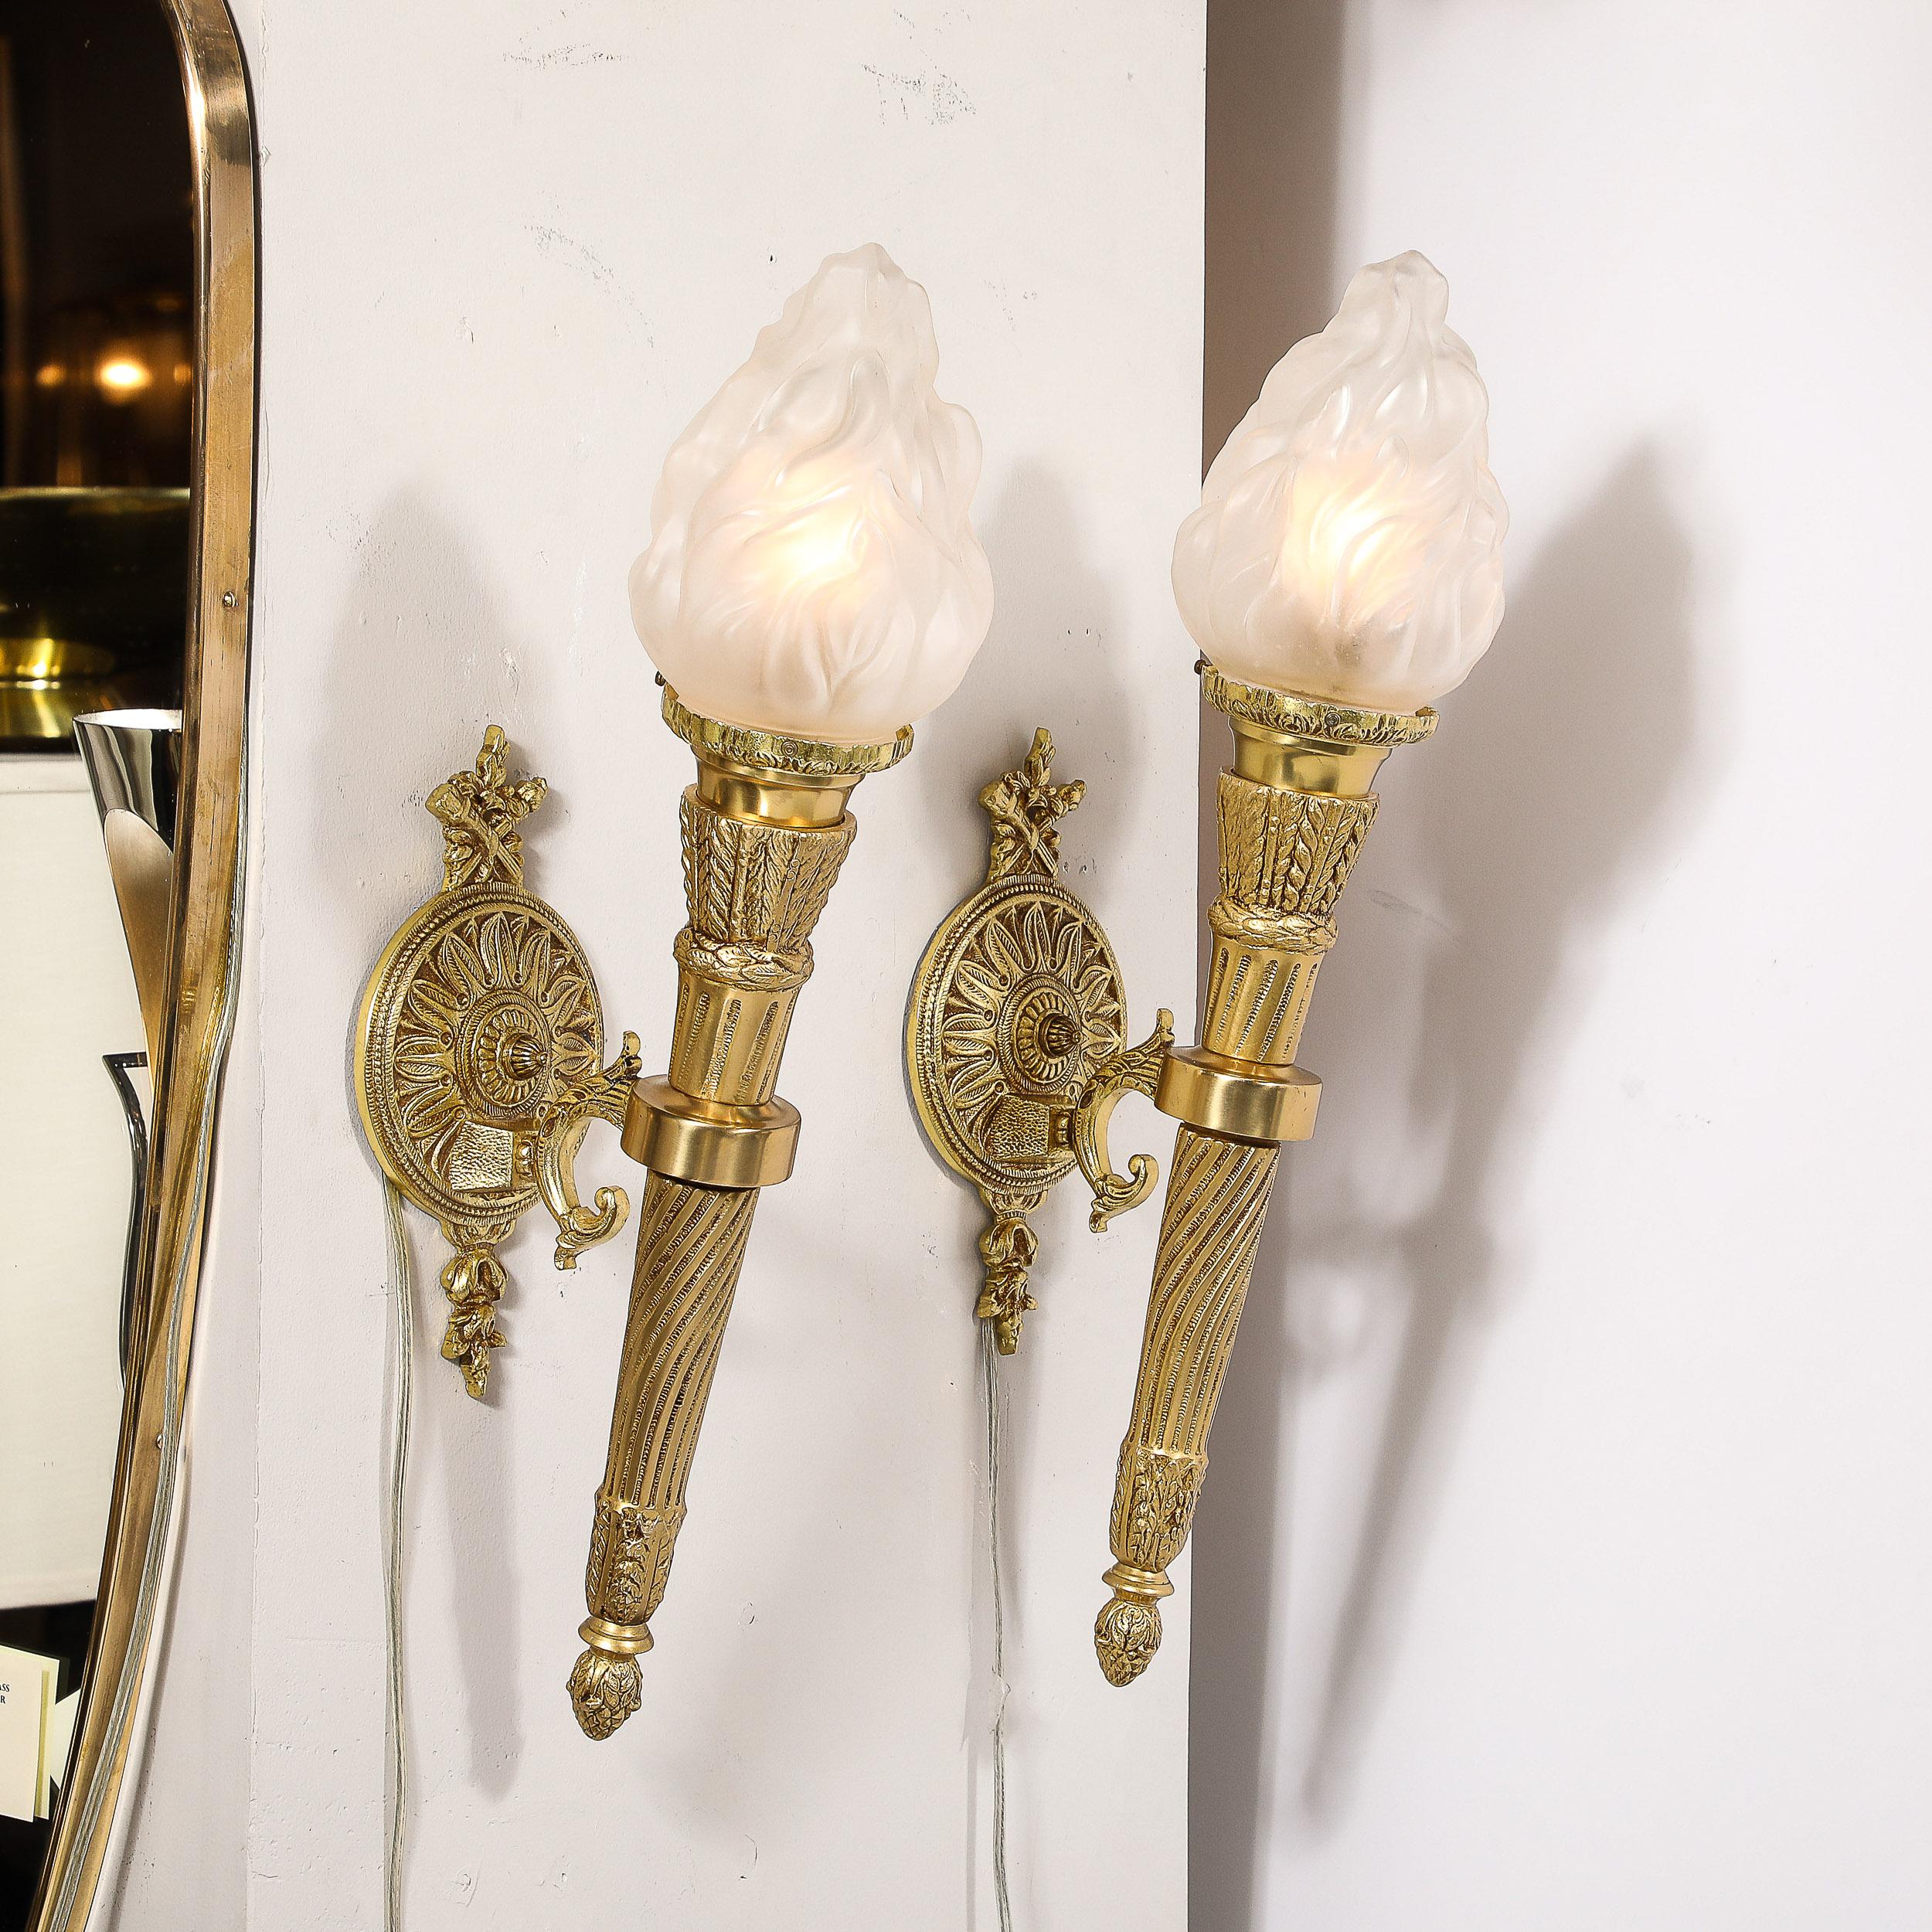 This regal and ornate Pair of Neoclassical Torch Sconces in Frosted Glass and antique  brass originates from France during the latter half of the 20th Century. Featuring frosted glass shades reminiscent of torch flames, supported by a handle like